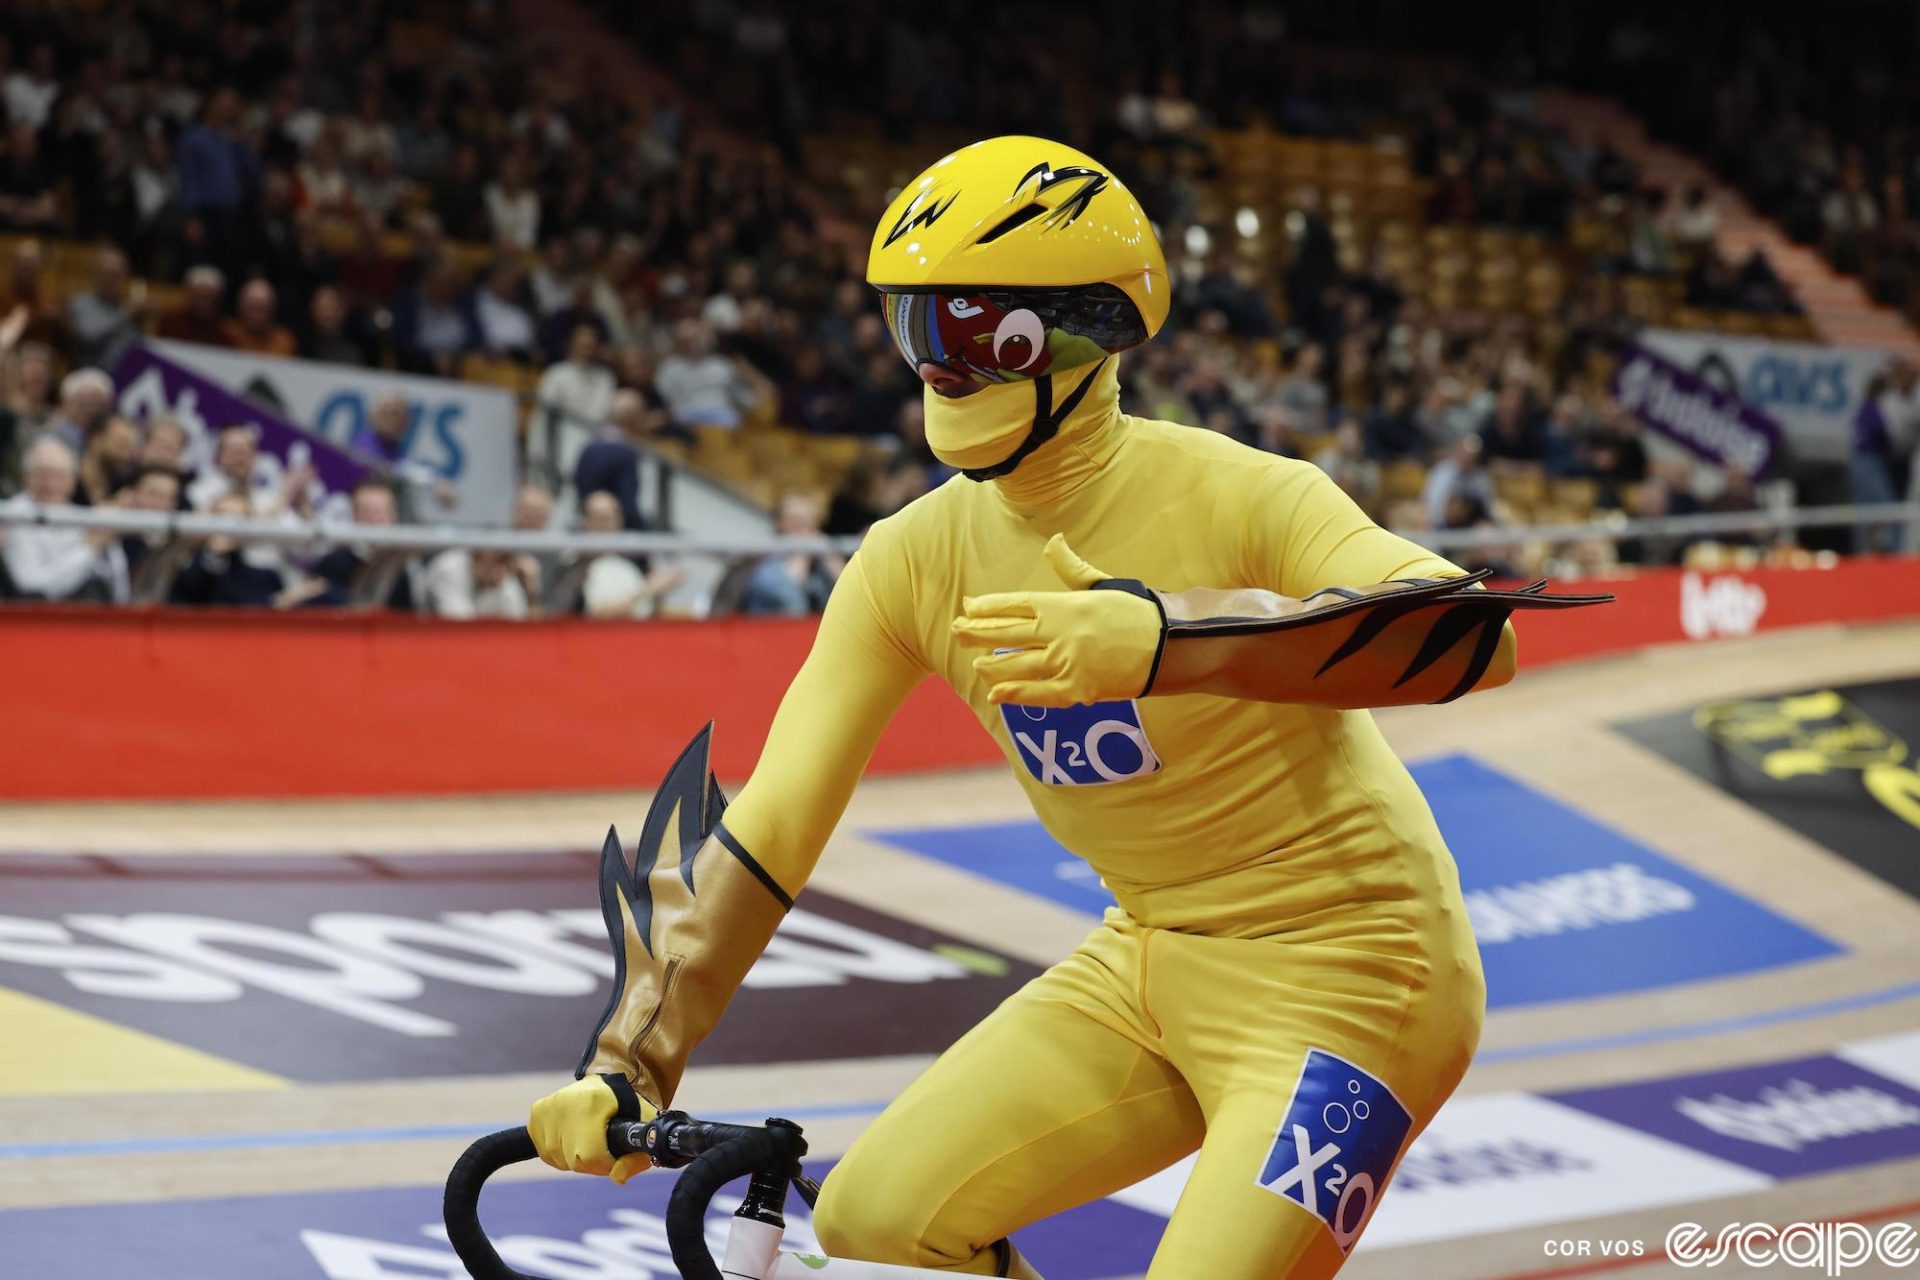 A man dressed in a full-length yellow skinsuit with stylized wrist cuffs that have flames extending off one side. His face is obscured behind a balaclava, visor, and helmet.